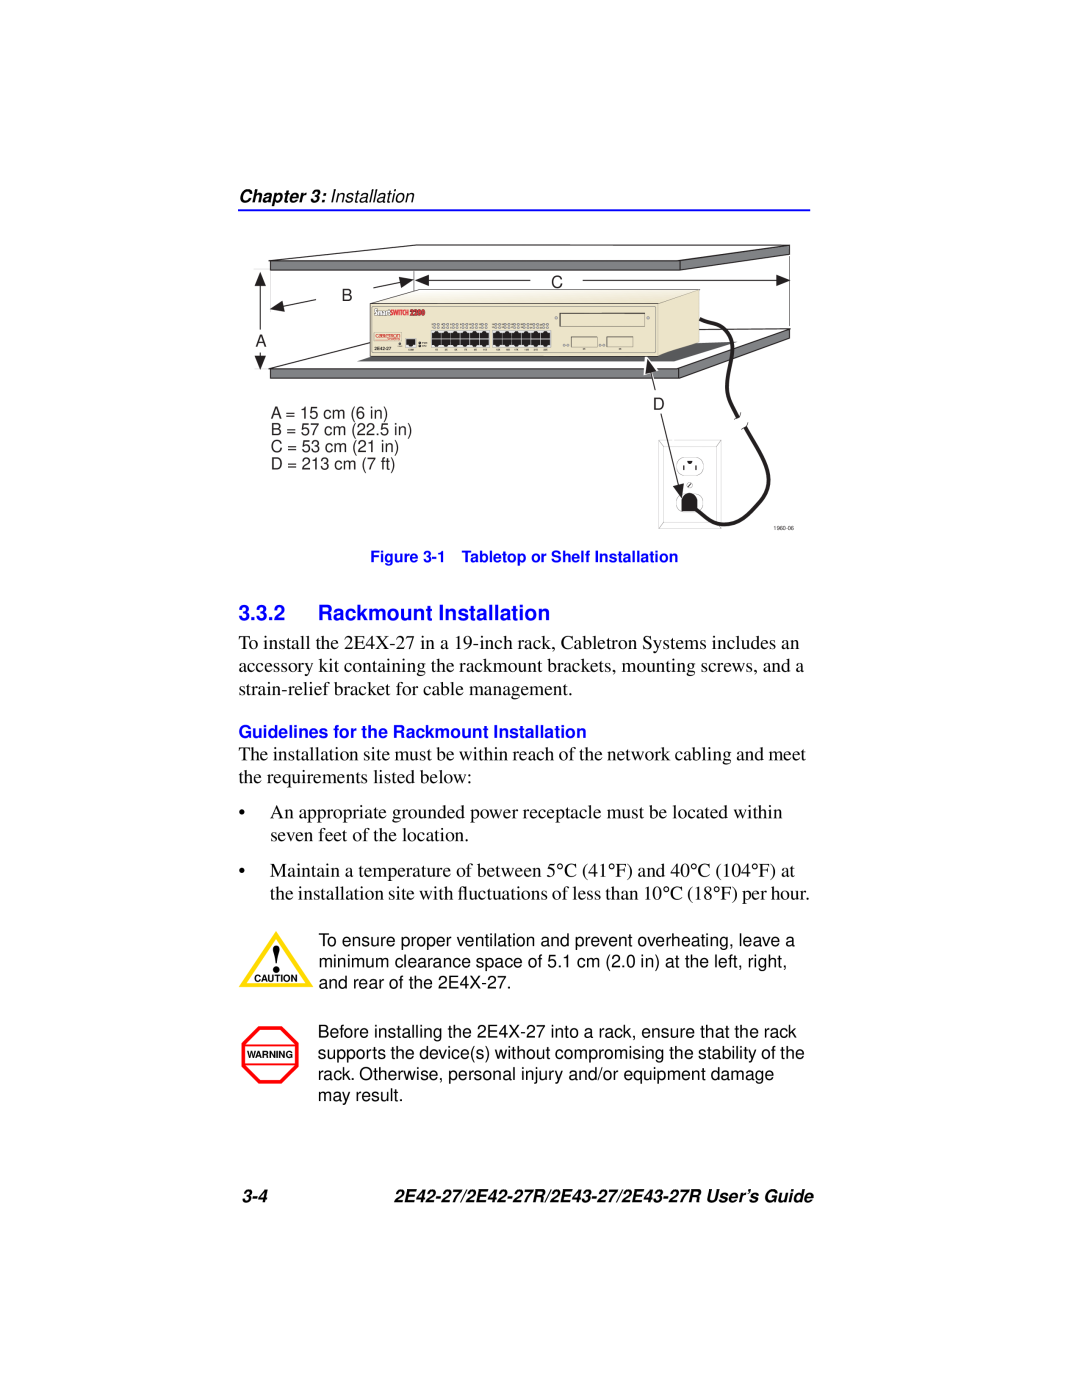 Cabletron Systems 2E43-27R, 2E42-27R manual Guidelines for the Rackmount Installation 